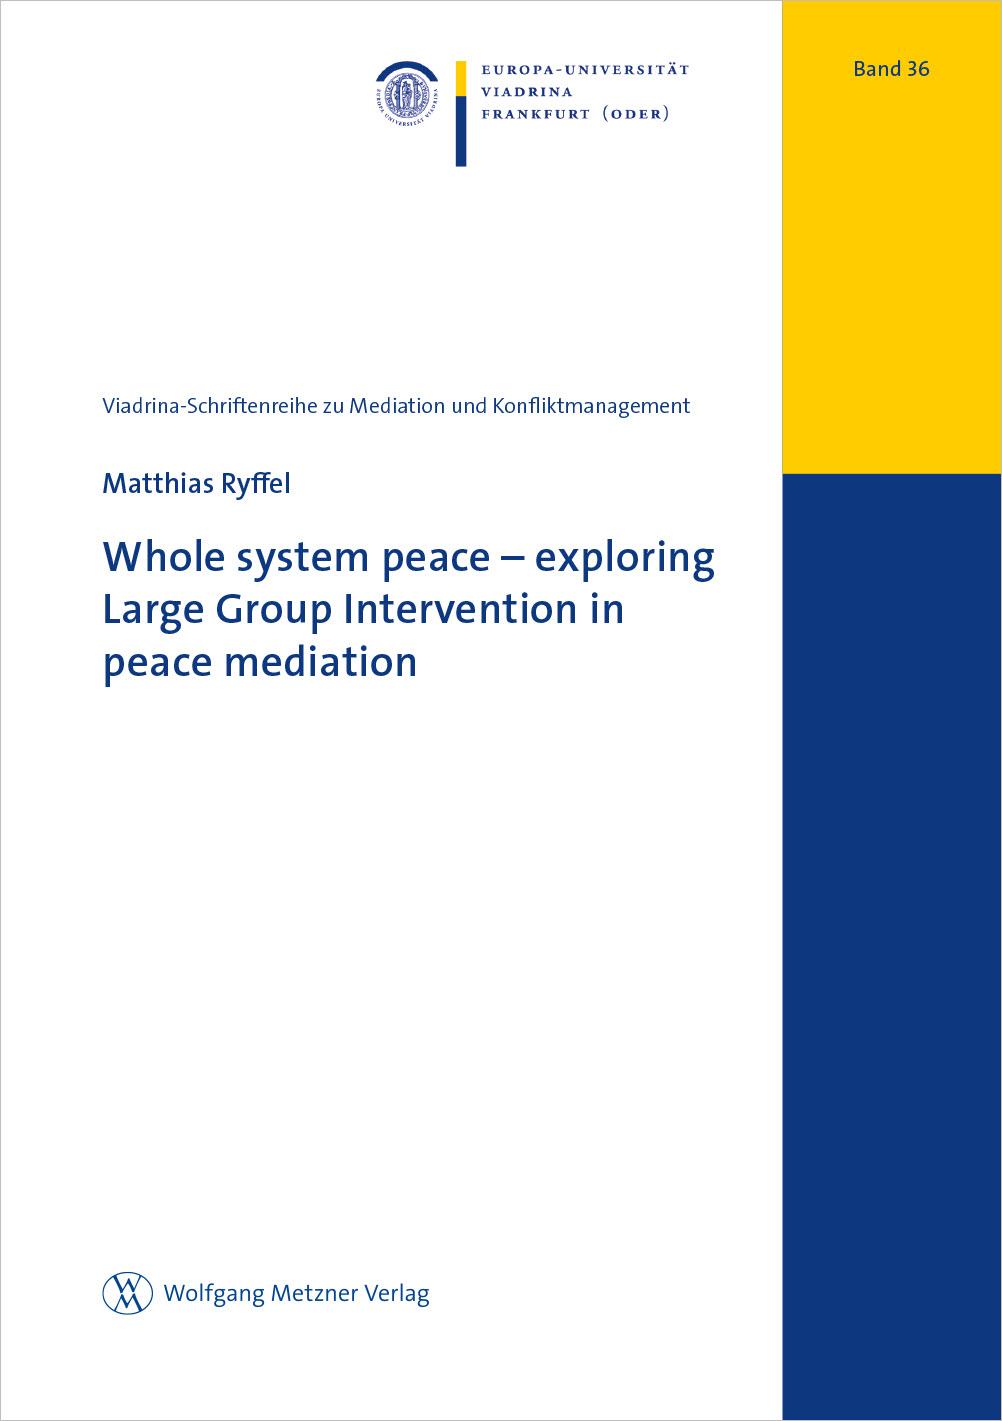 Whole system peace – exploring Large Group Intervention in peace mediation